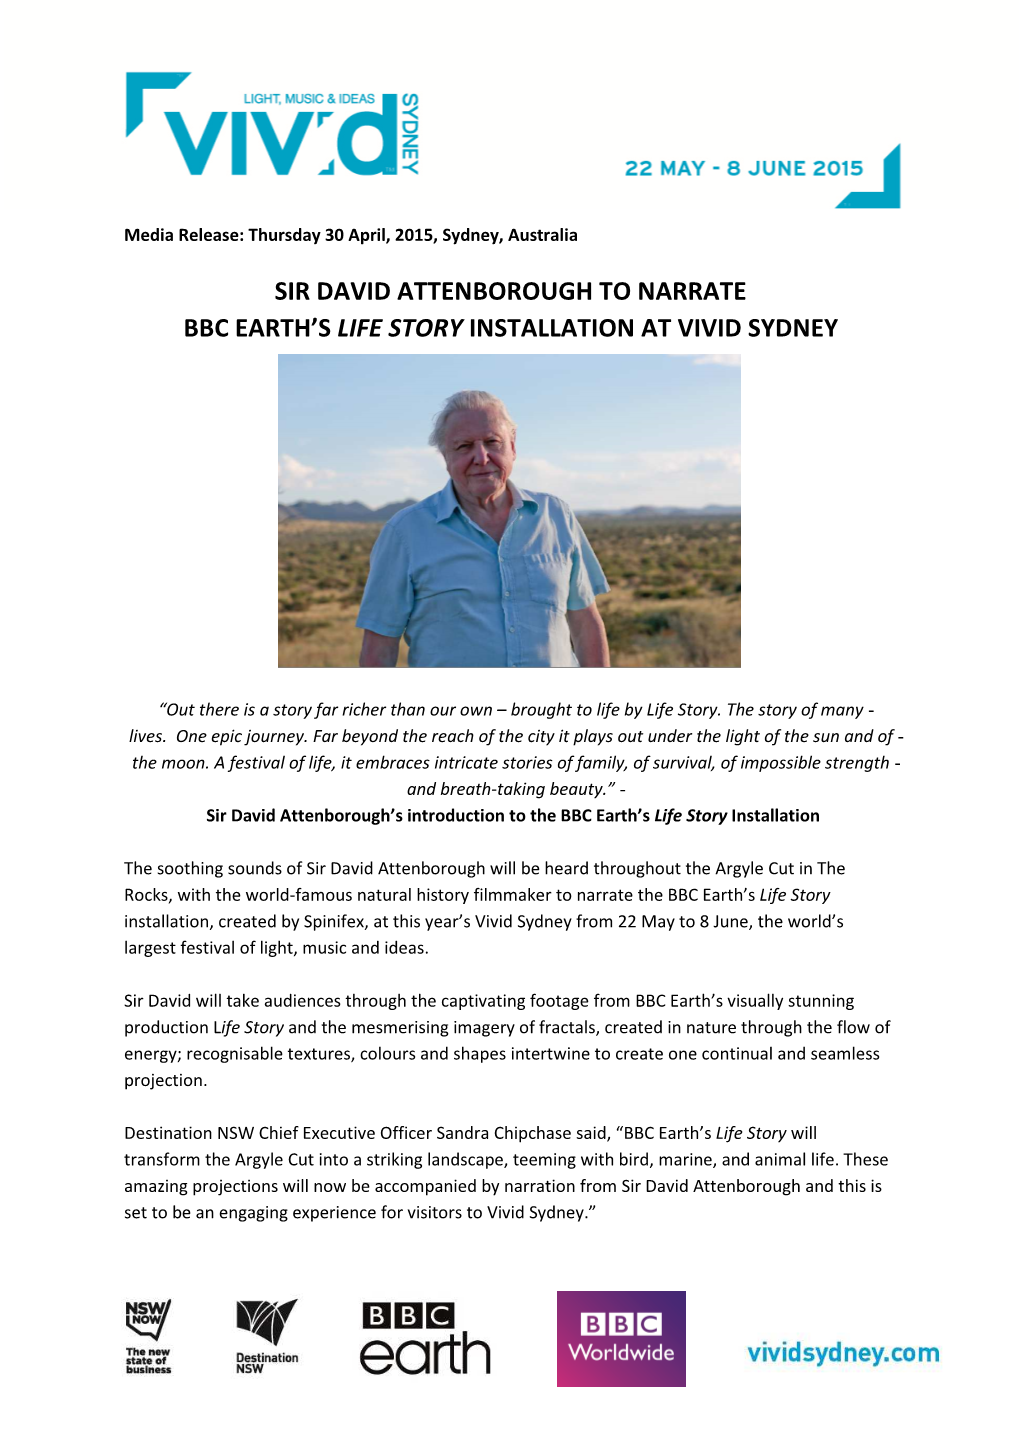 Media Release: Sir David Attenborough to Narrate BBC Earth's Life Story Installation at Vivid Sydney